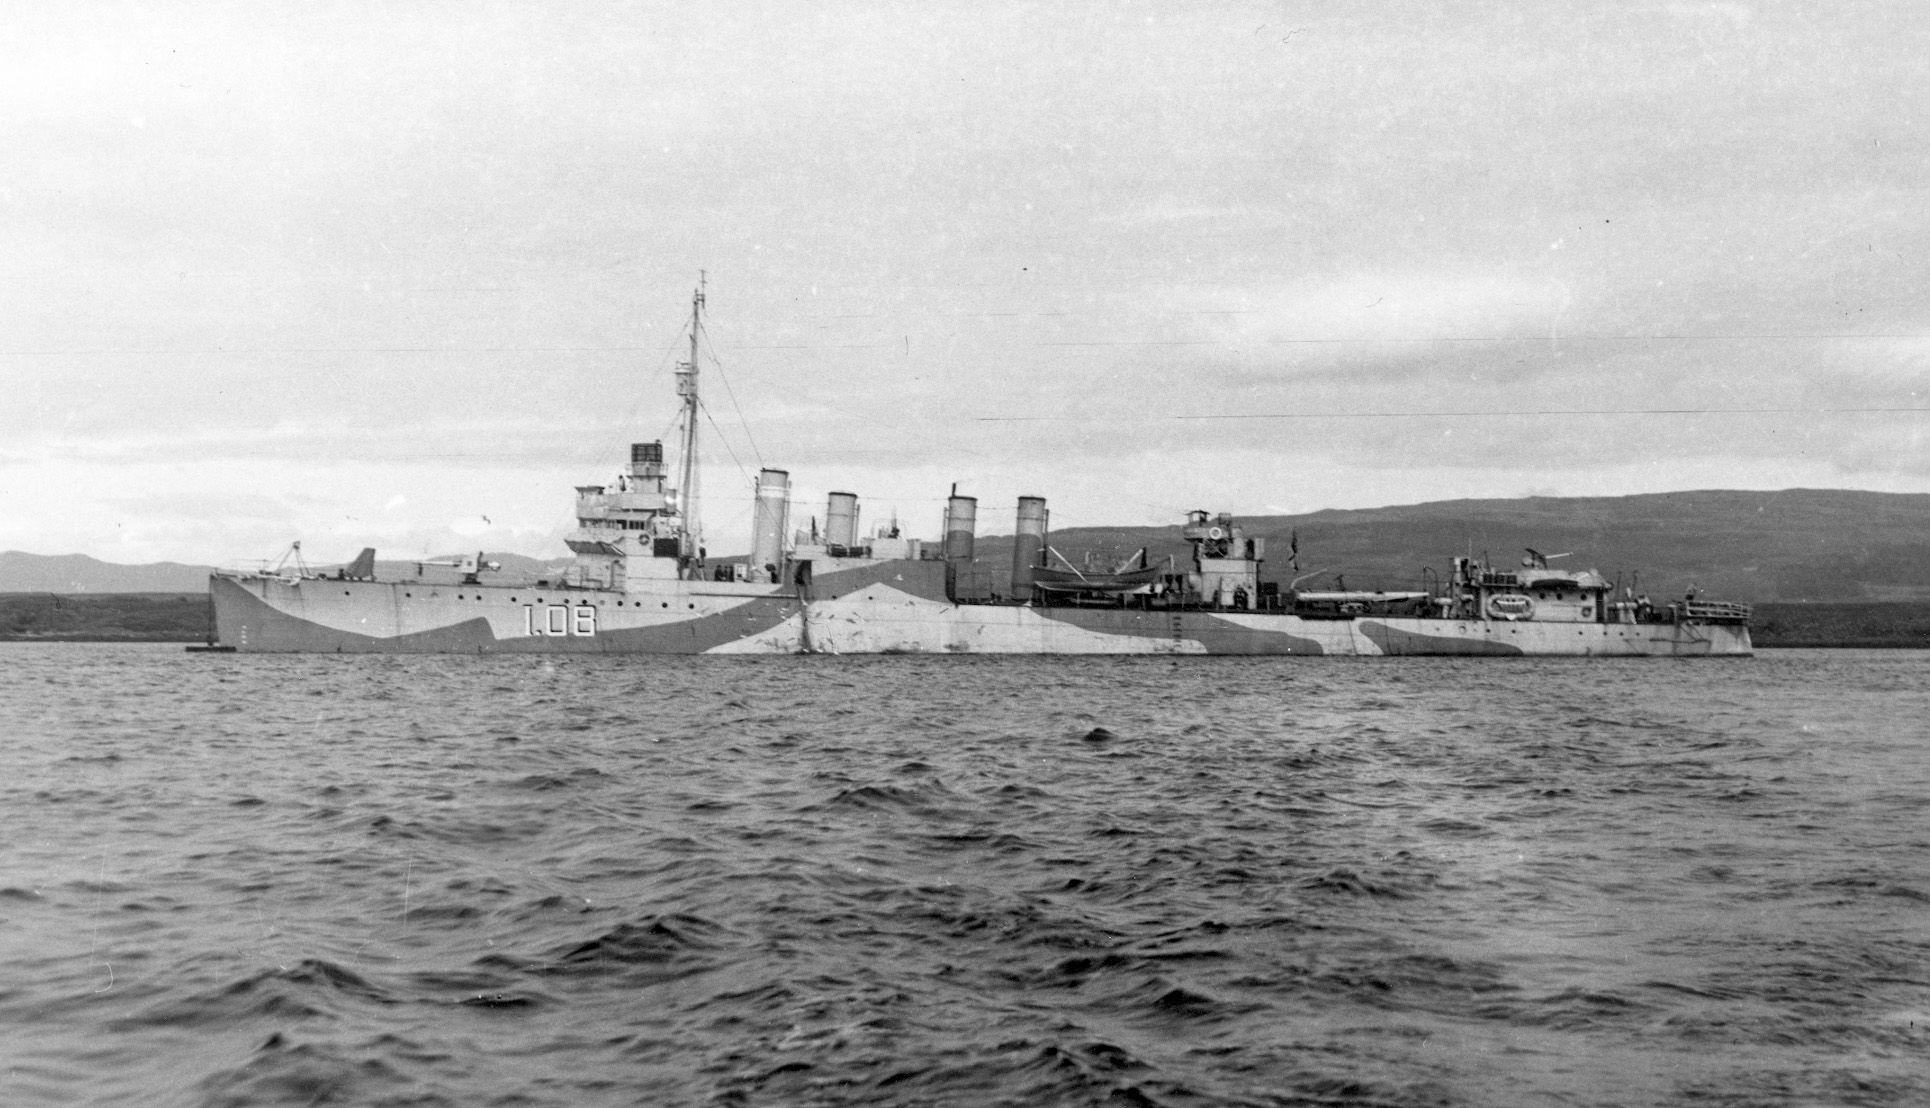 The destroyer HMS Brighton, formerly the U.S. Clemson-class destroyer Cowell, was transferred to the Soviet Union in July 1944 and renamed Zharki. The transfer was made along with several other U.S. and British ships in anticipation of a postwar distribution of former ships of the Italian fleet. 